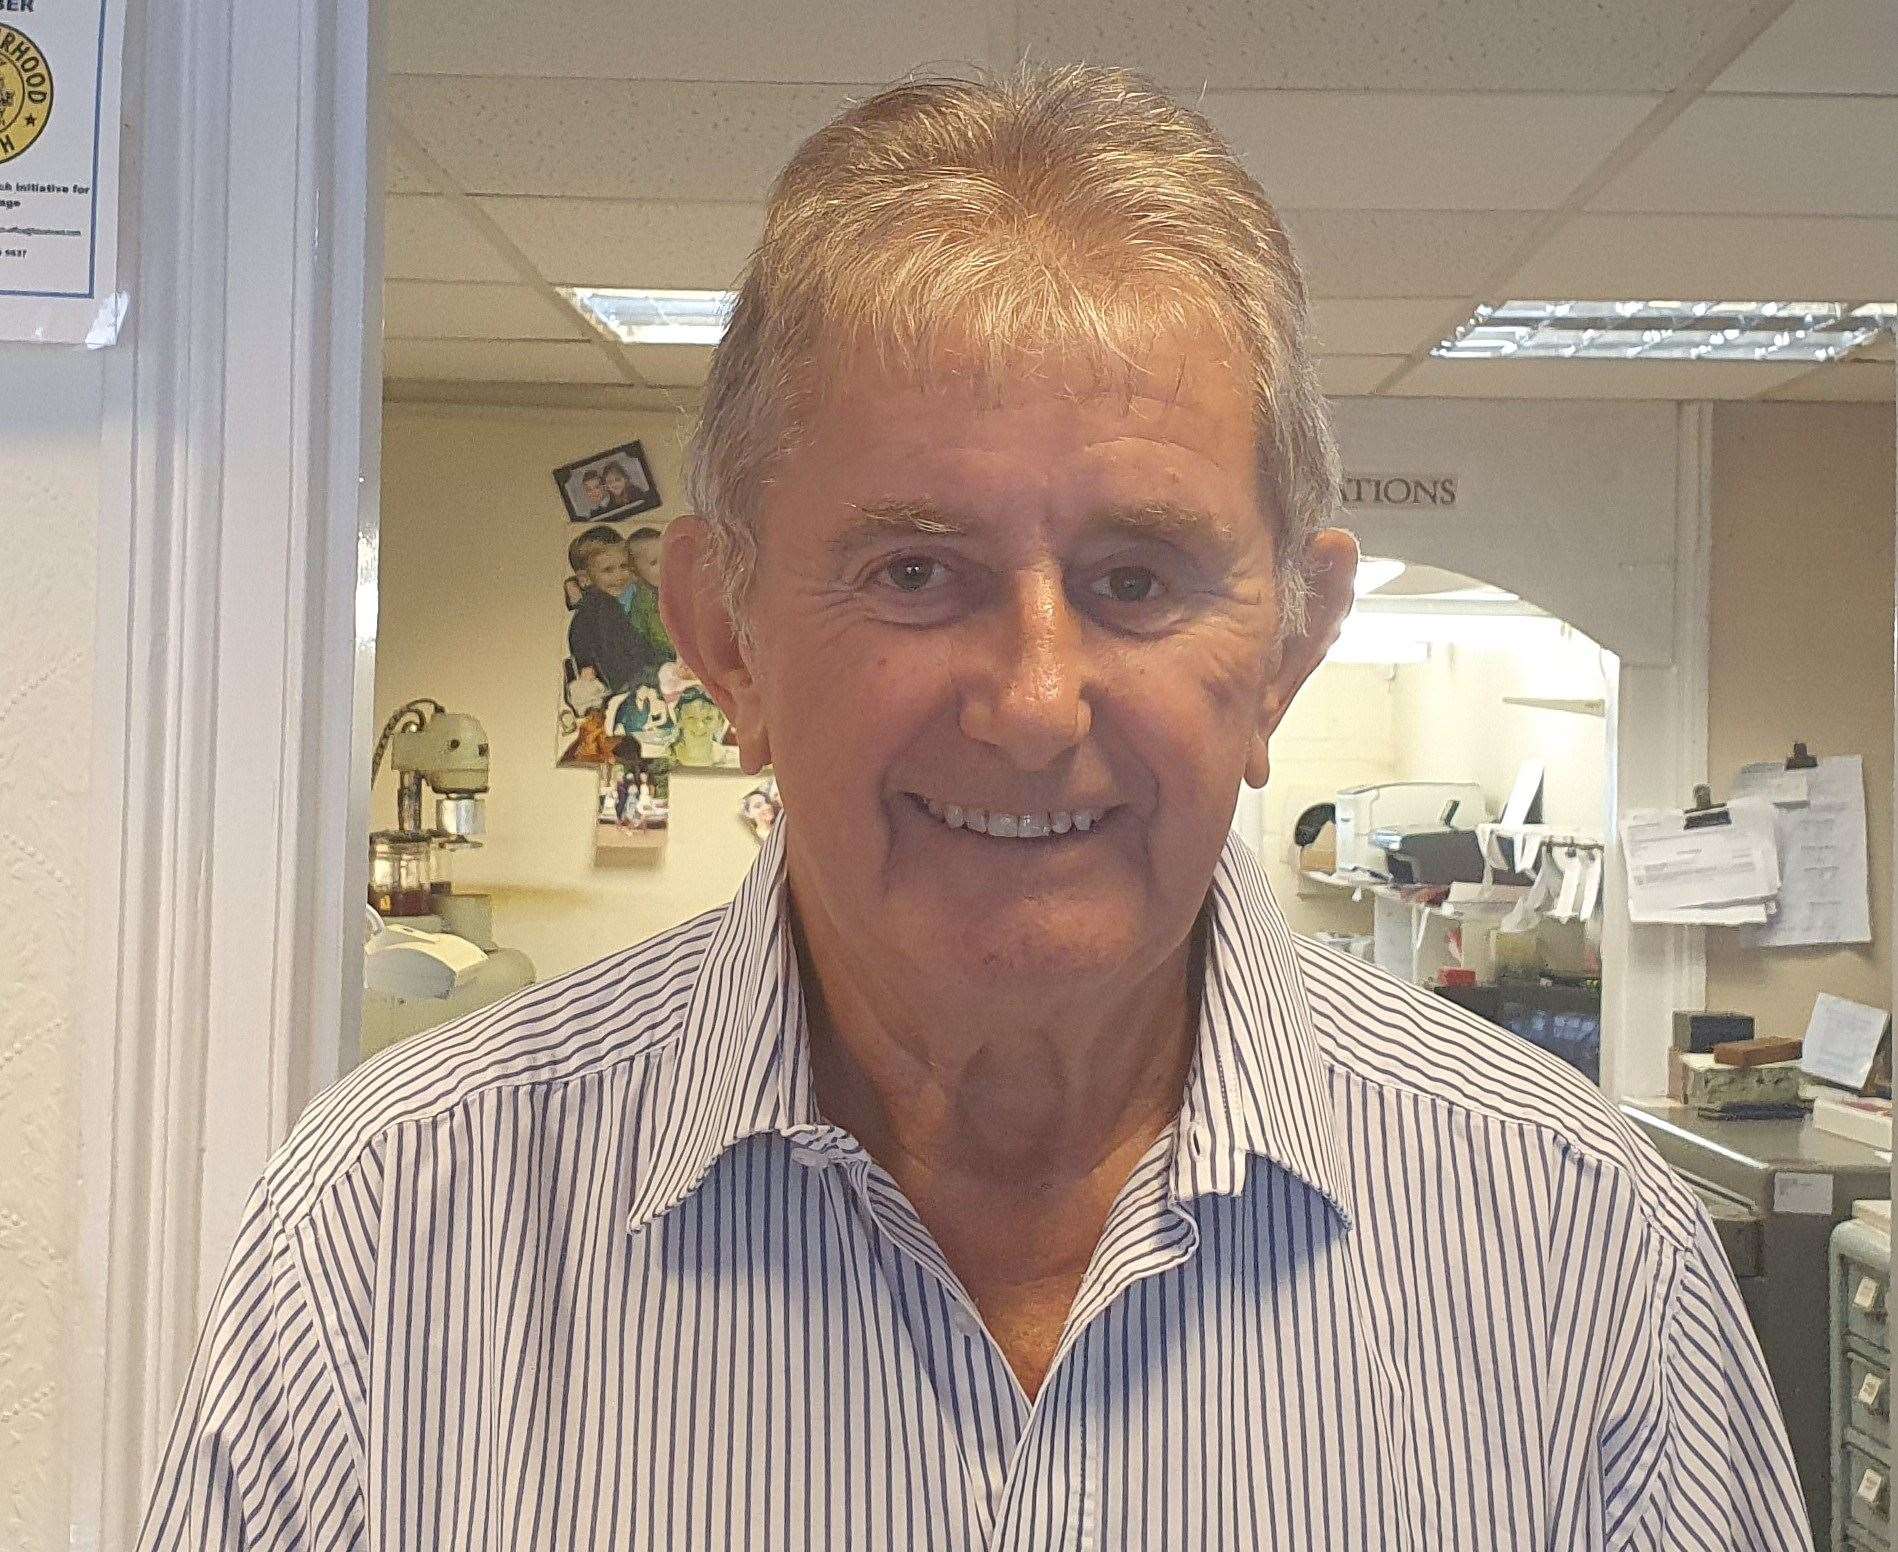 Graham Pilkington owns Pilkington's Jewellers on the High Street and says Bexley is a Kent village